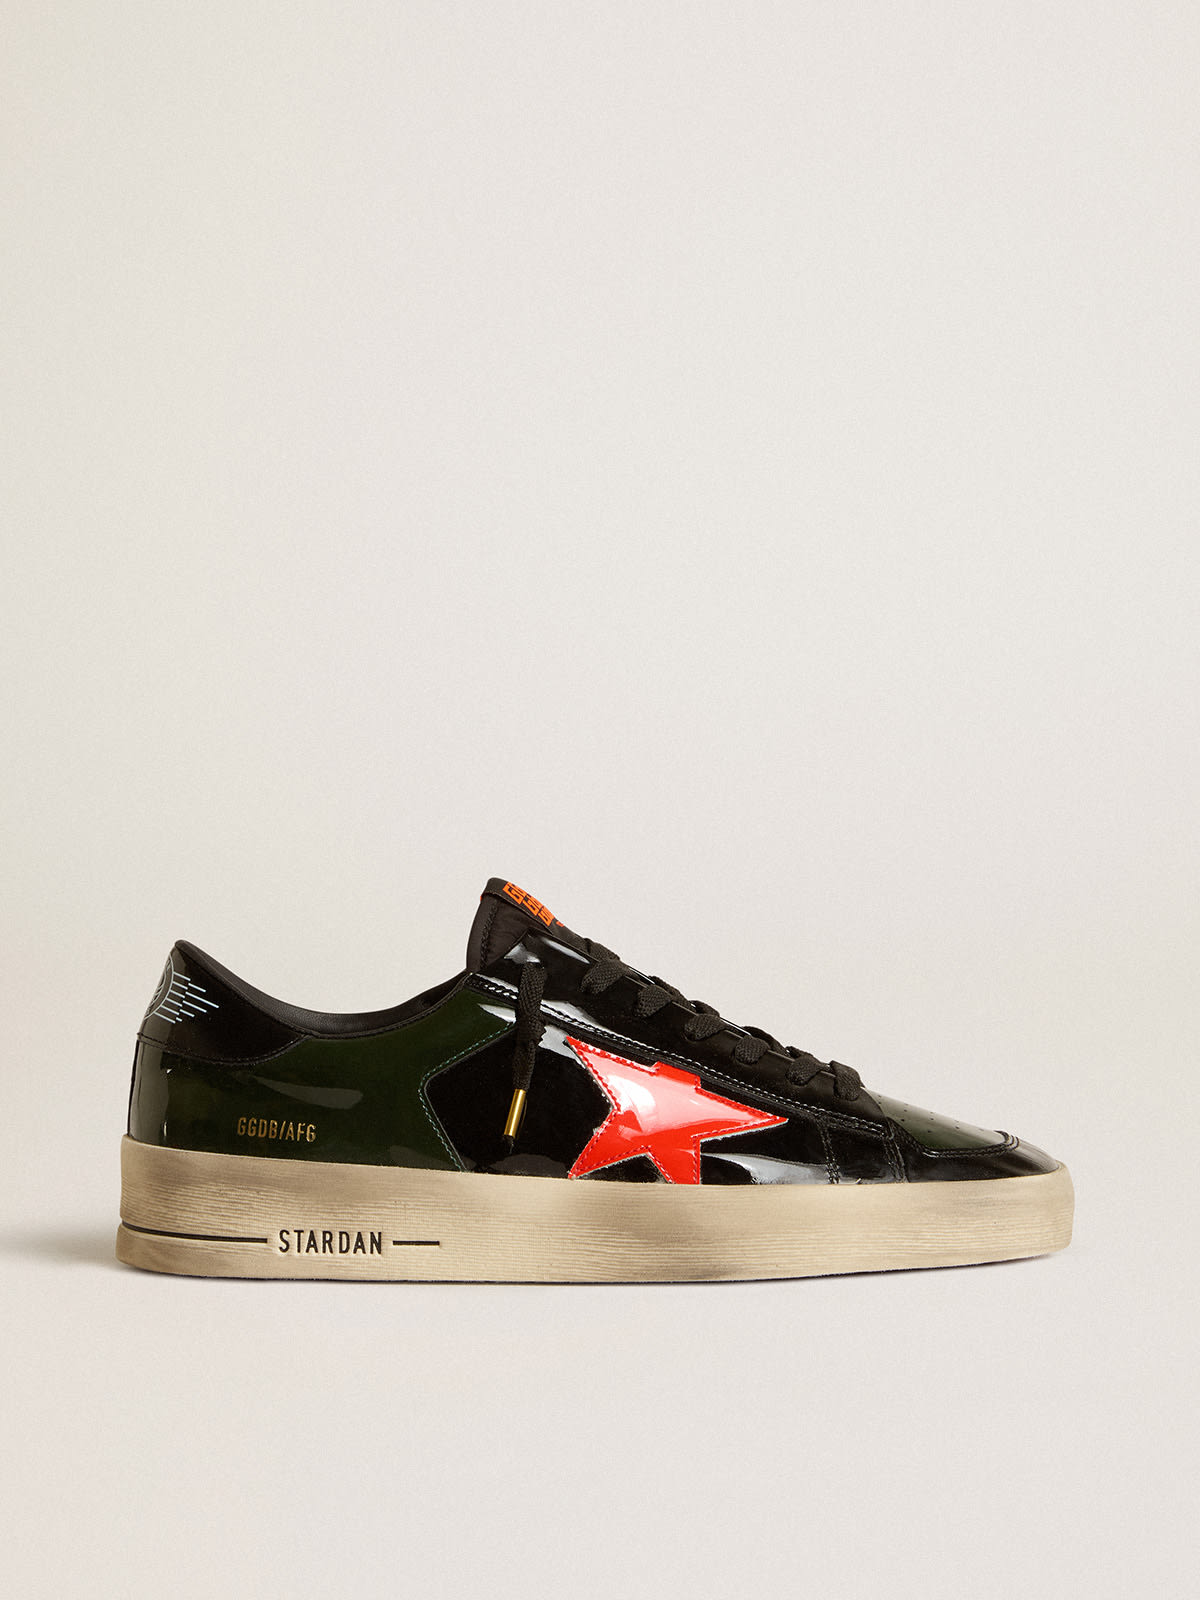 Golden Goose - Women's Stardan in black and green patent leather with orange star in 